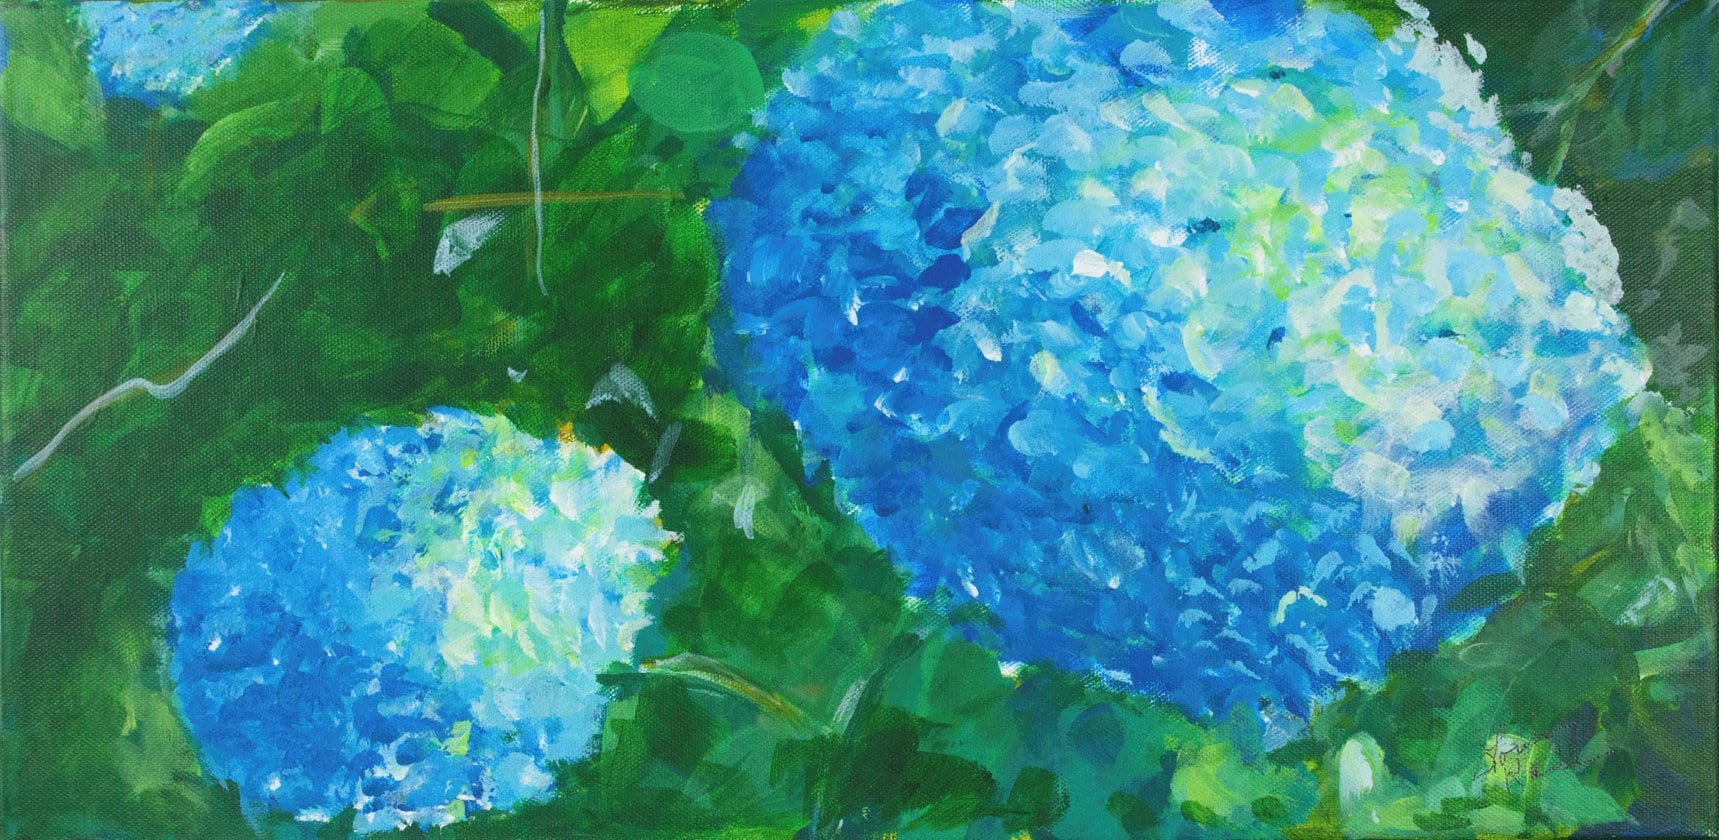 Acrylic paint on canvas is the medium used for this realistic floral still-life depicting a close-up of a beautiful blooming blue hydrangea bush.